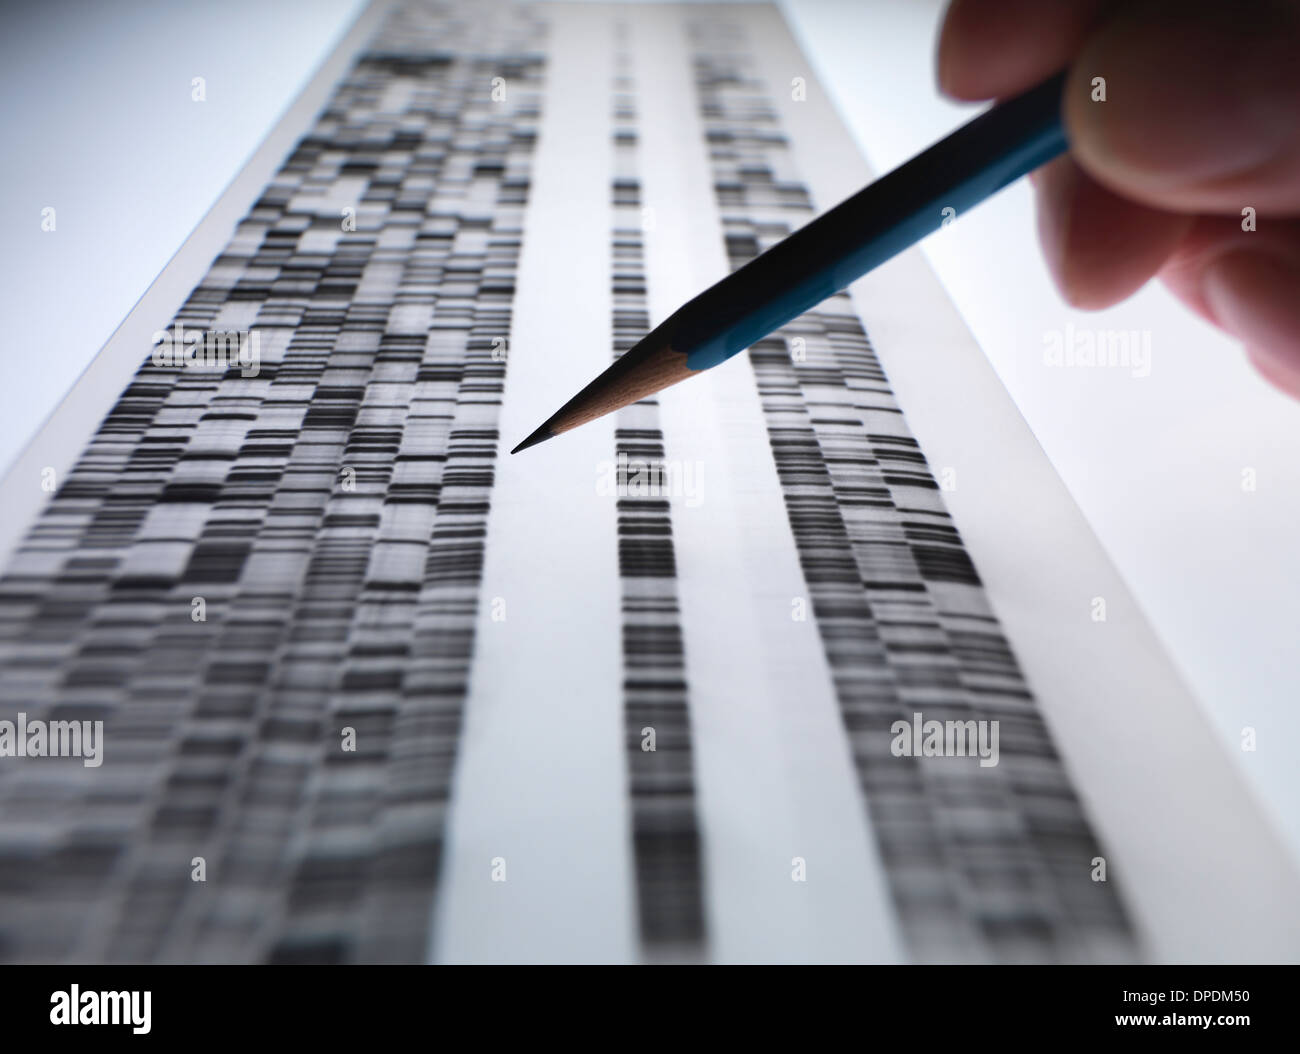 Scientist viewing DNA gel used in genetics, forensic, pharma research, biotechnology and biomedical science Stock Photo